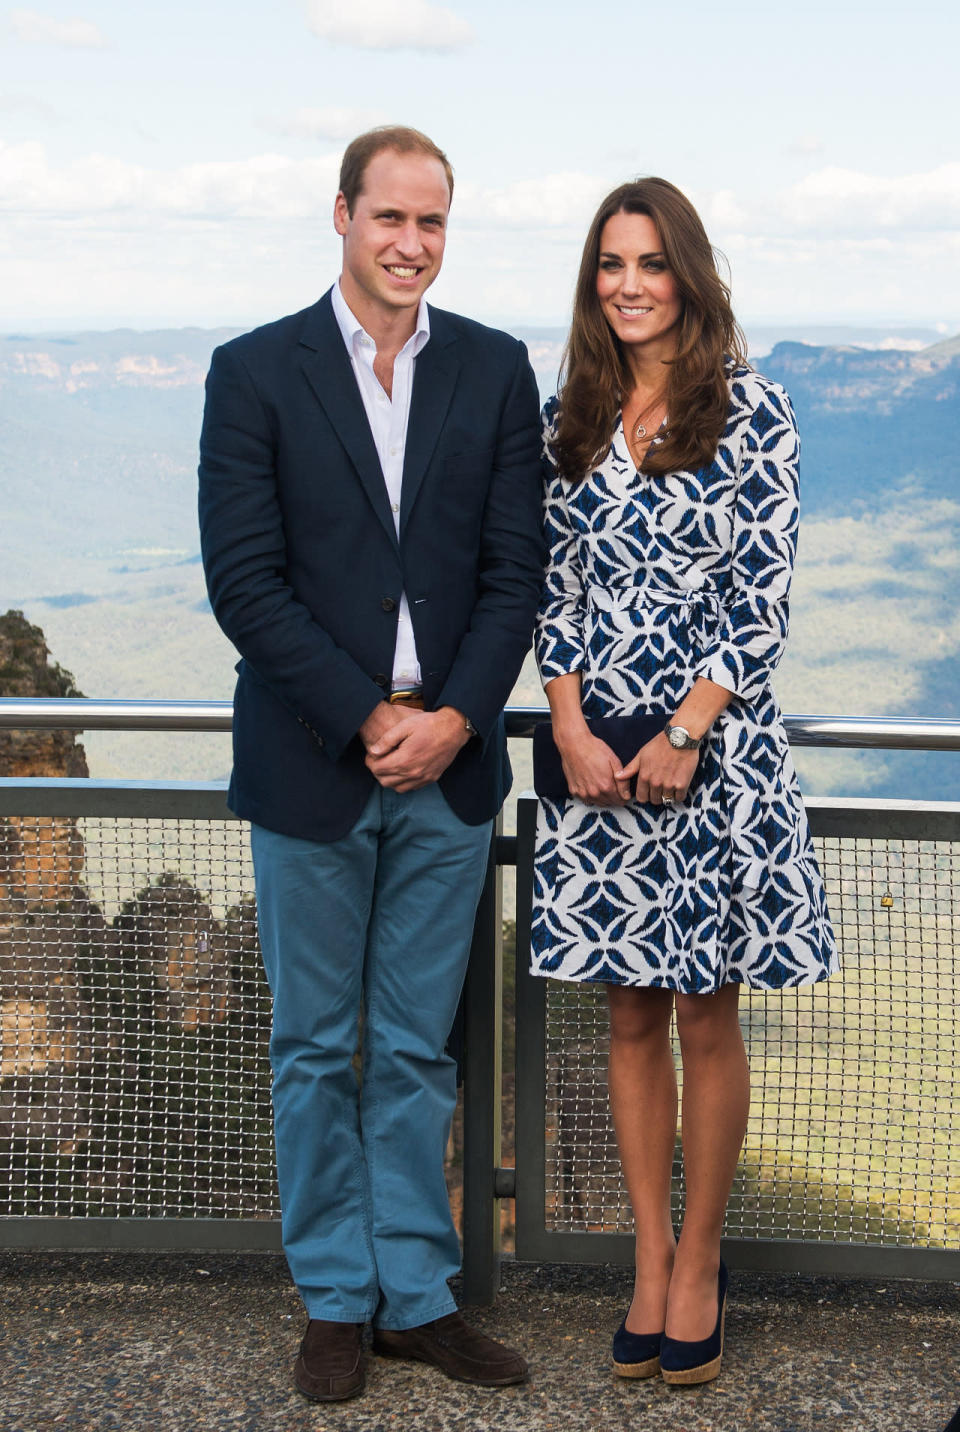 <p>Kate and William visited Australia’s Blue Mountains with the Duchess donning a printed dress from Diane von Furstenberg. Navy wedges by Corkswoon and a Stuart Weitzman bag finished the look.</p><p><i>[Photo: PA]</i></p>